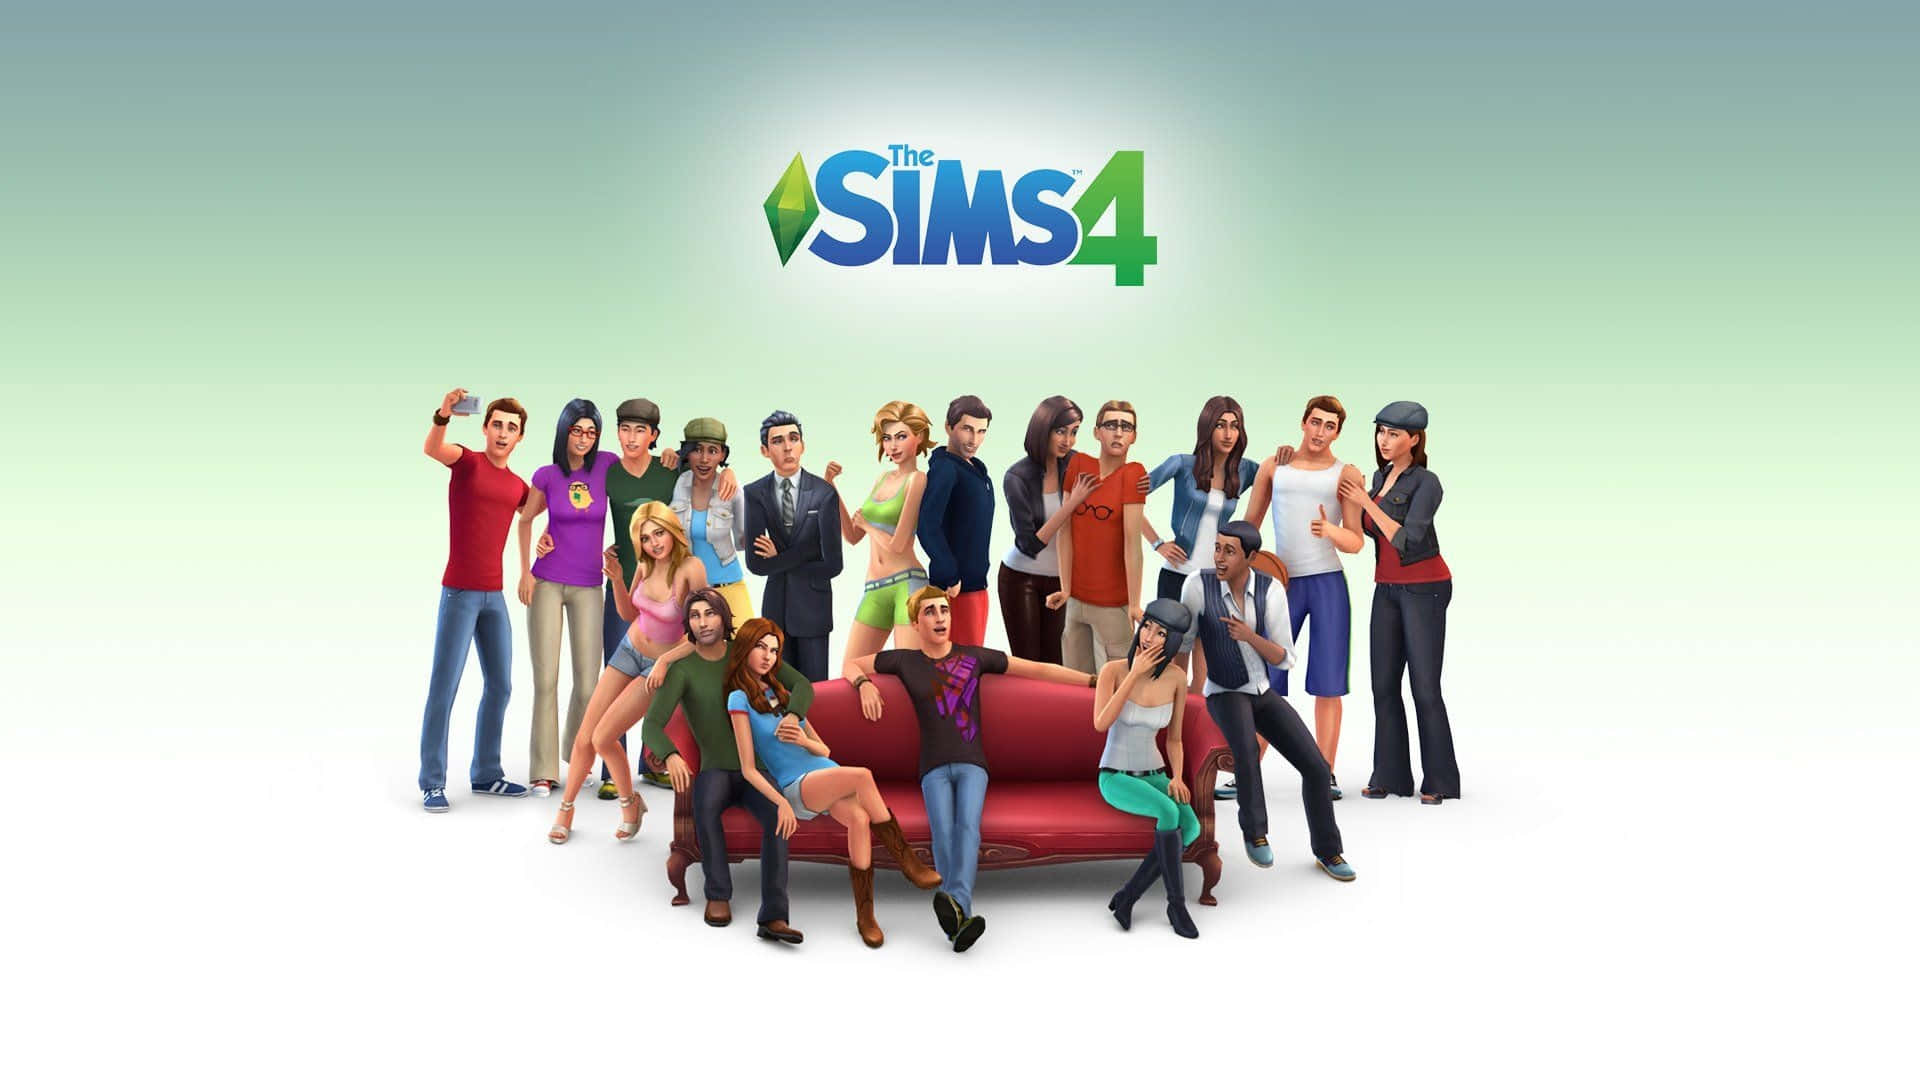 The Sims 4 Is A Group Of People Standing Together Wallpaper